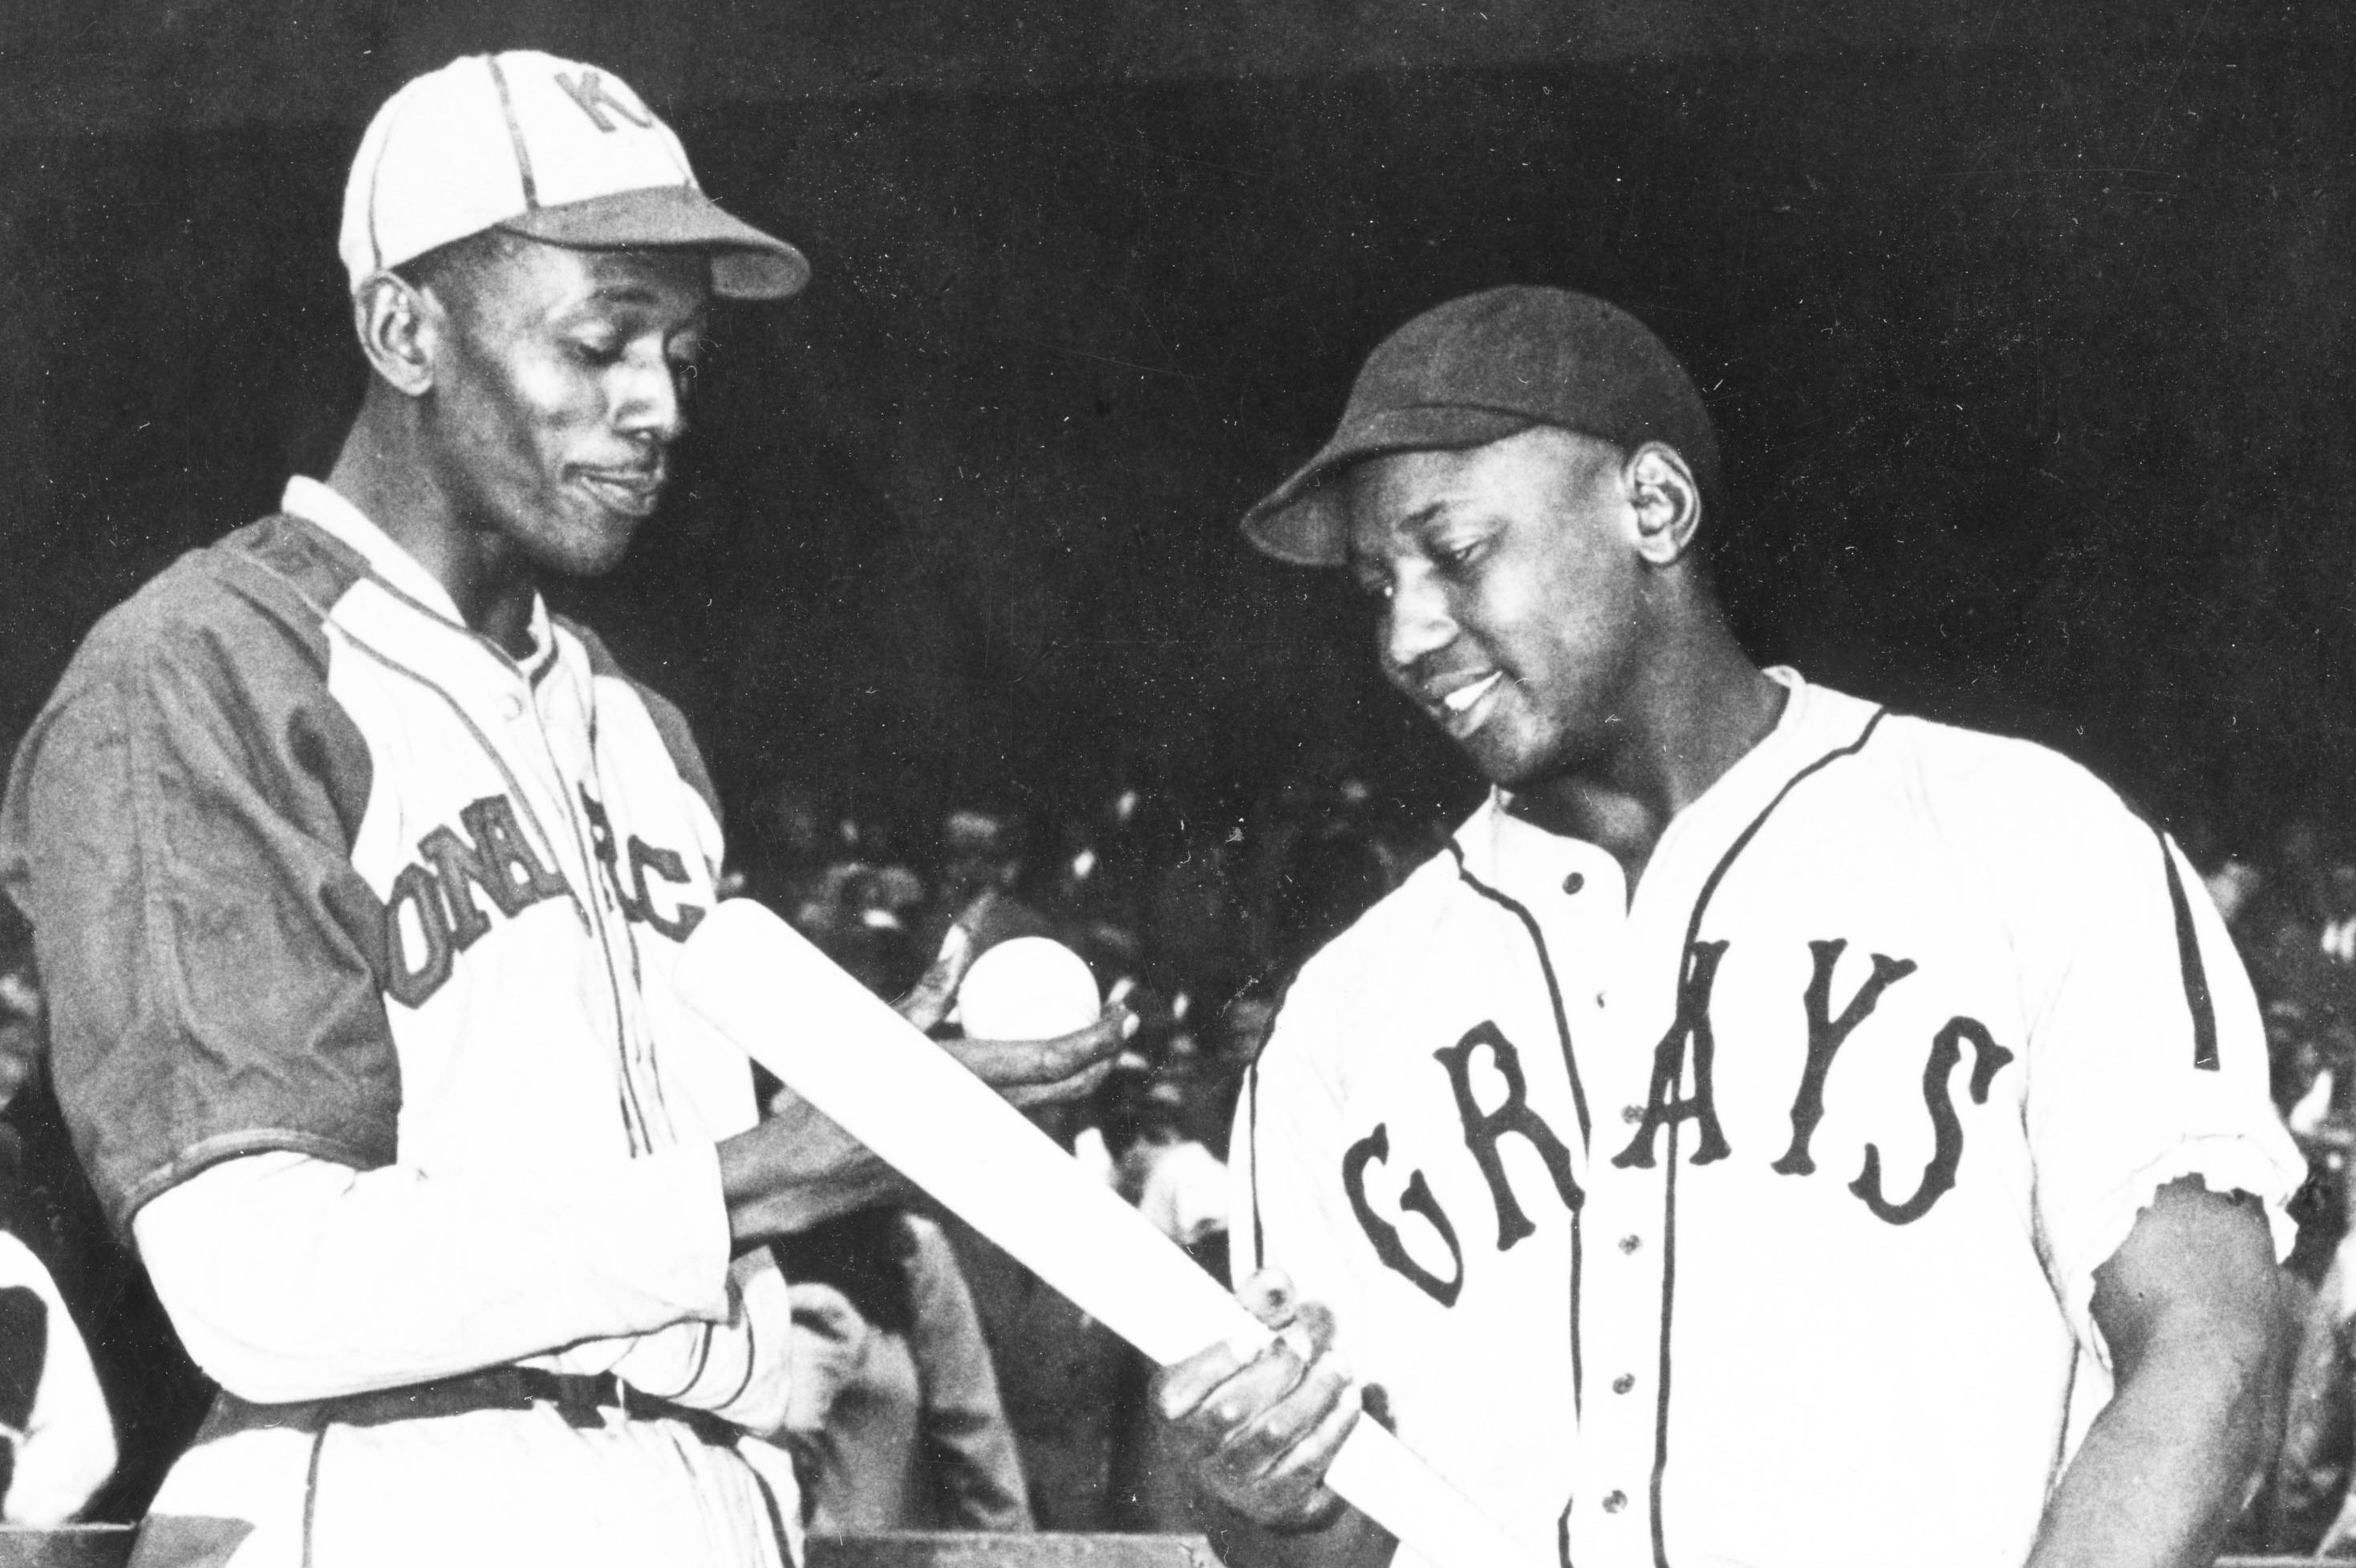 Pro baseball players Satchel Paige and Josh Gibson of the Negro Leagues